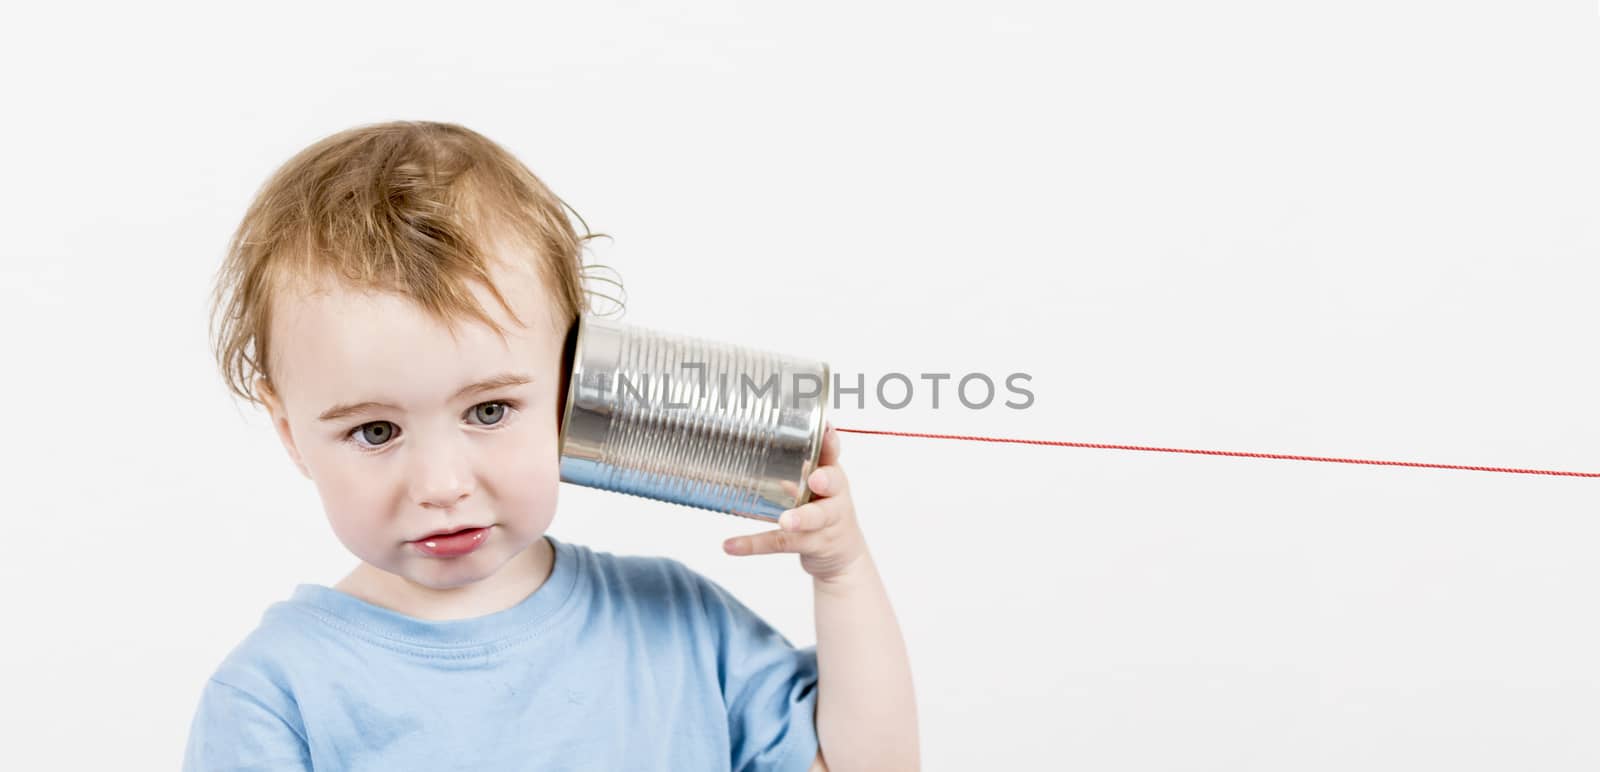 young, disappointed child listening to tin can phone. caucasian child in horizontal image